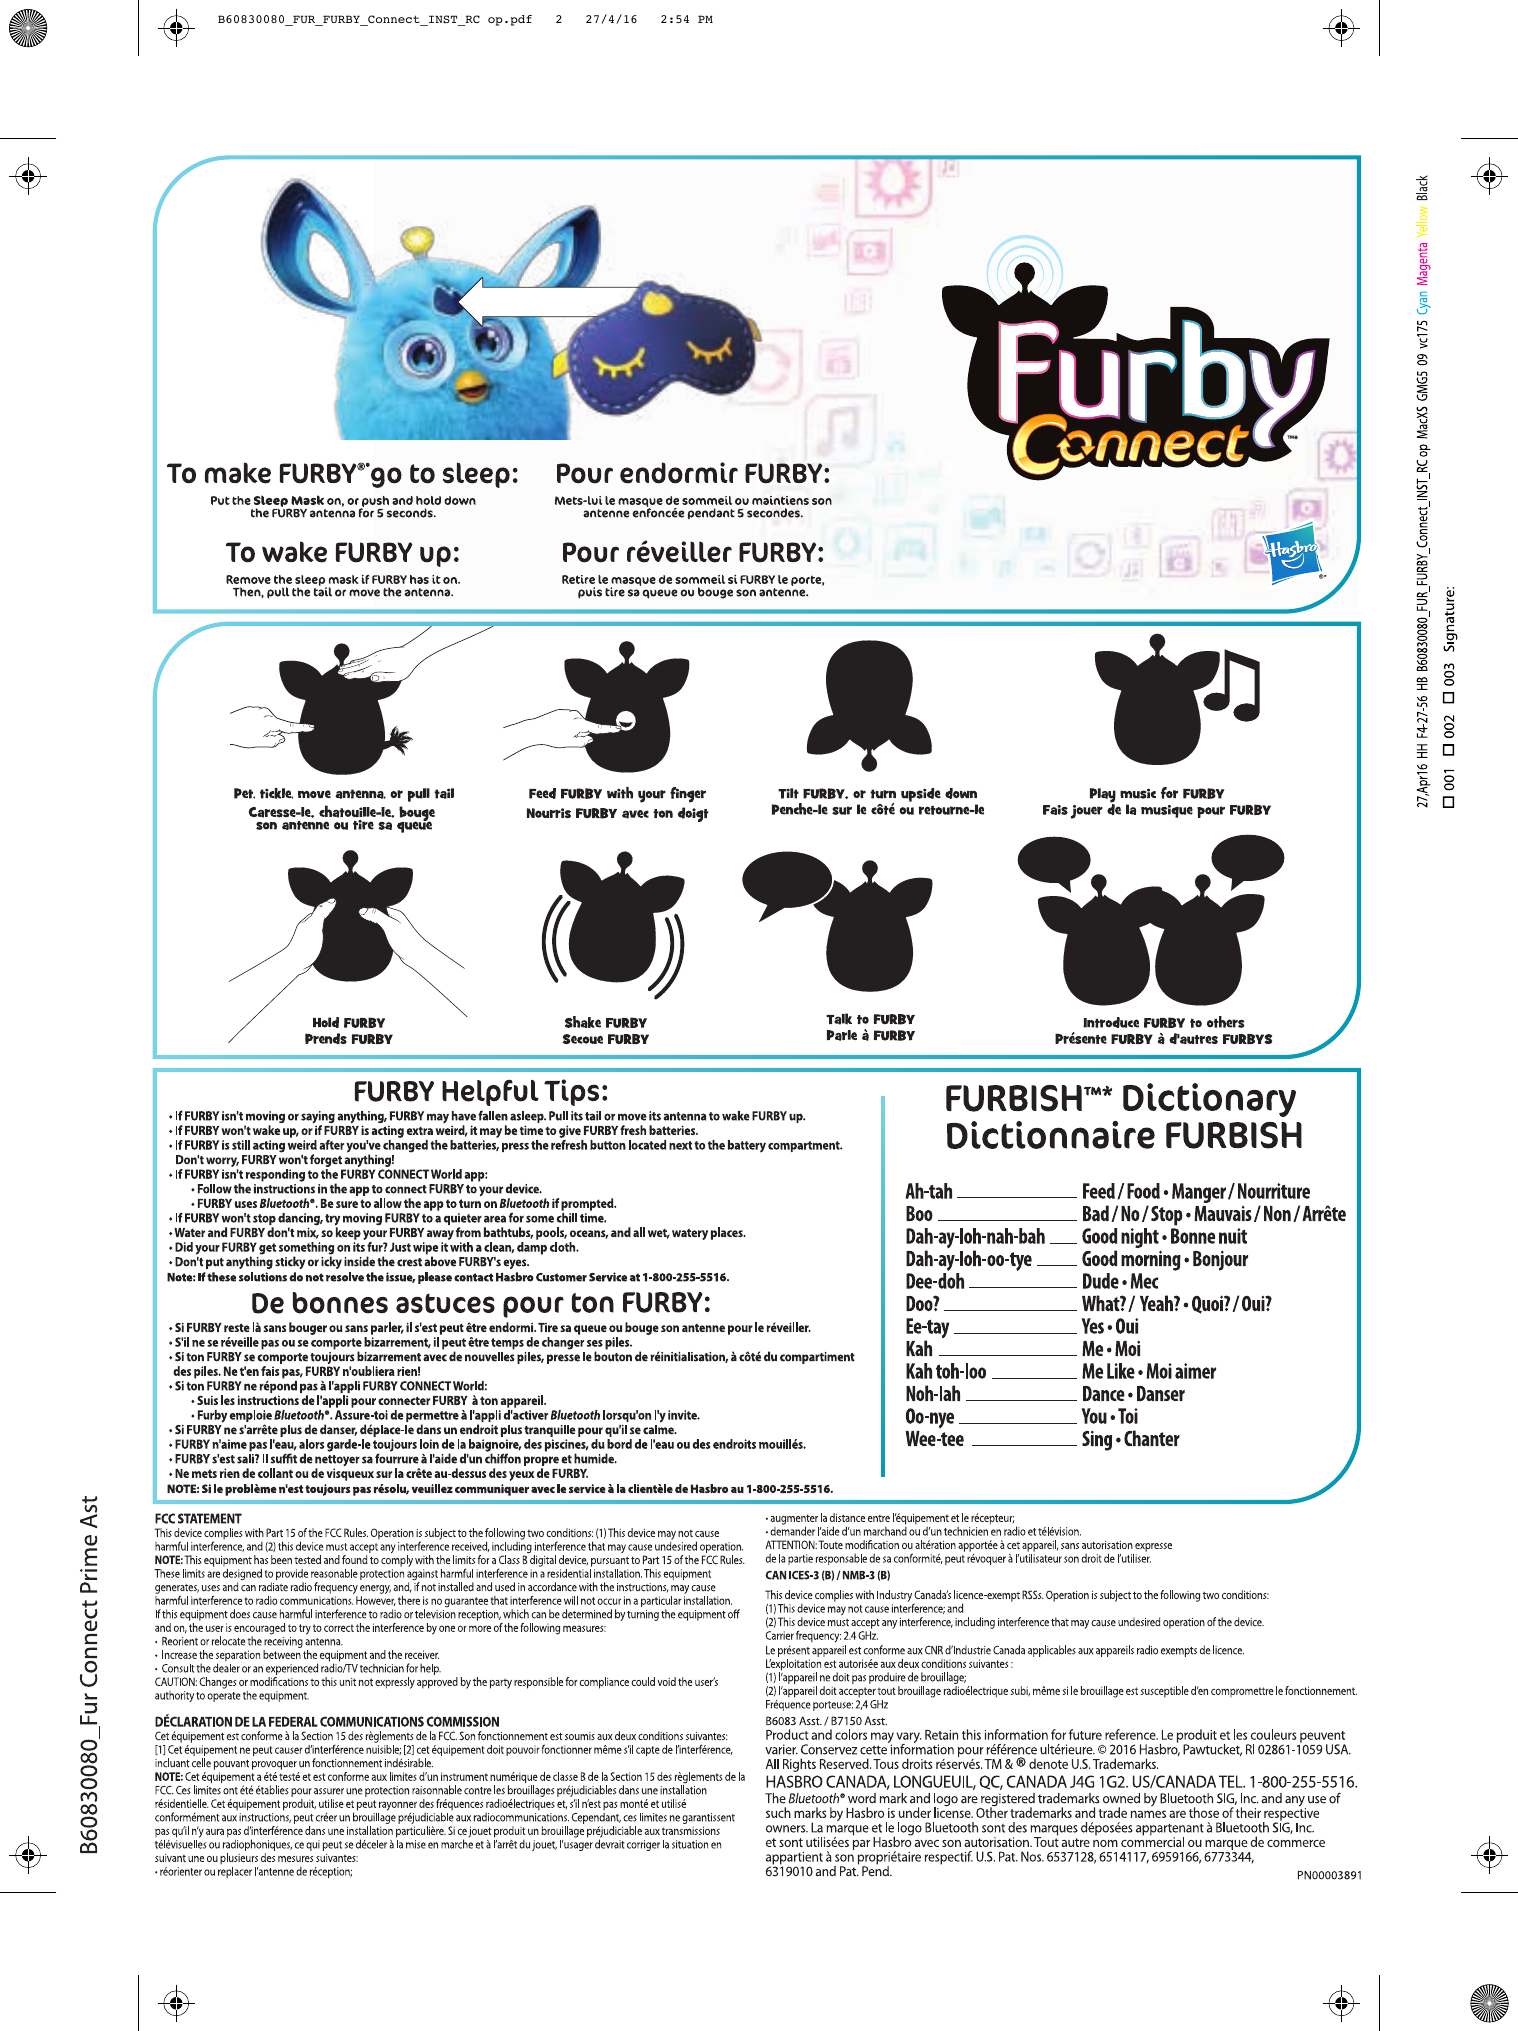 Furby Connect Instruction Manual